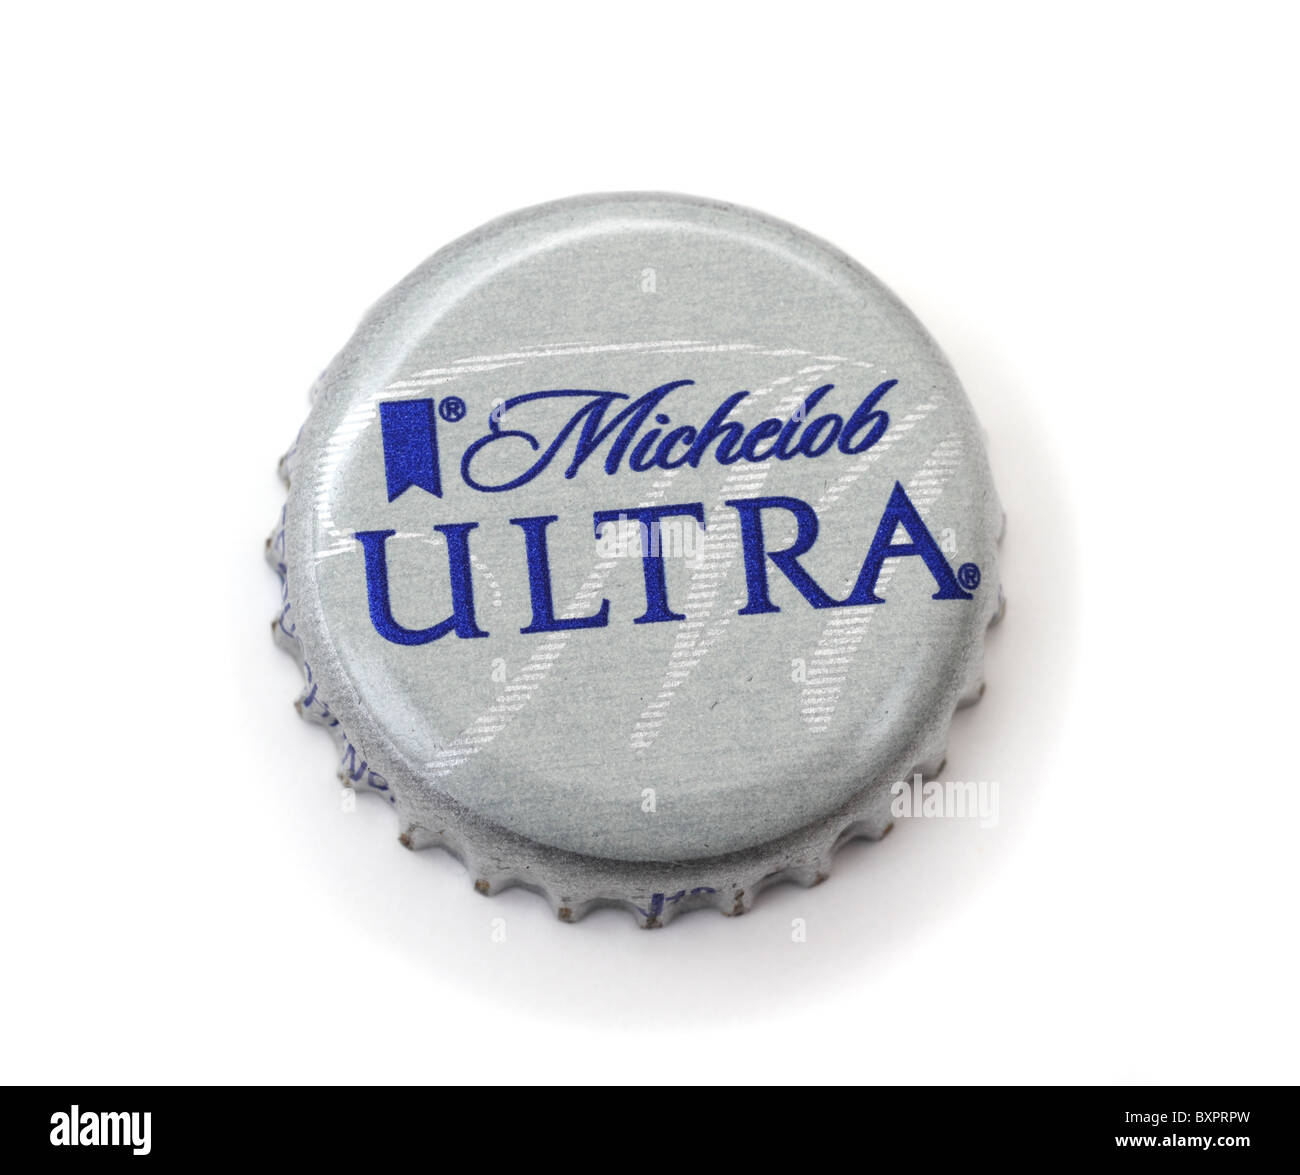 Michelob Ultra Beer Bottle Cap Cut Out Stock Images And Pictures Alamy